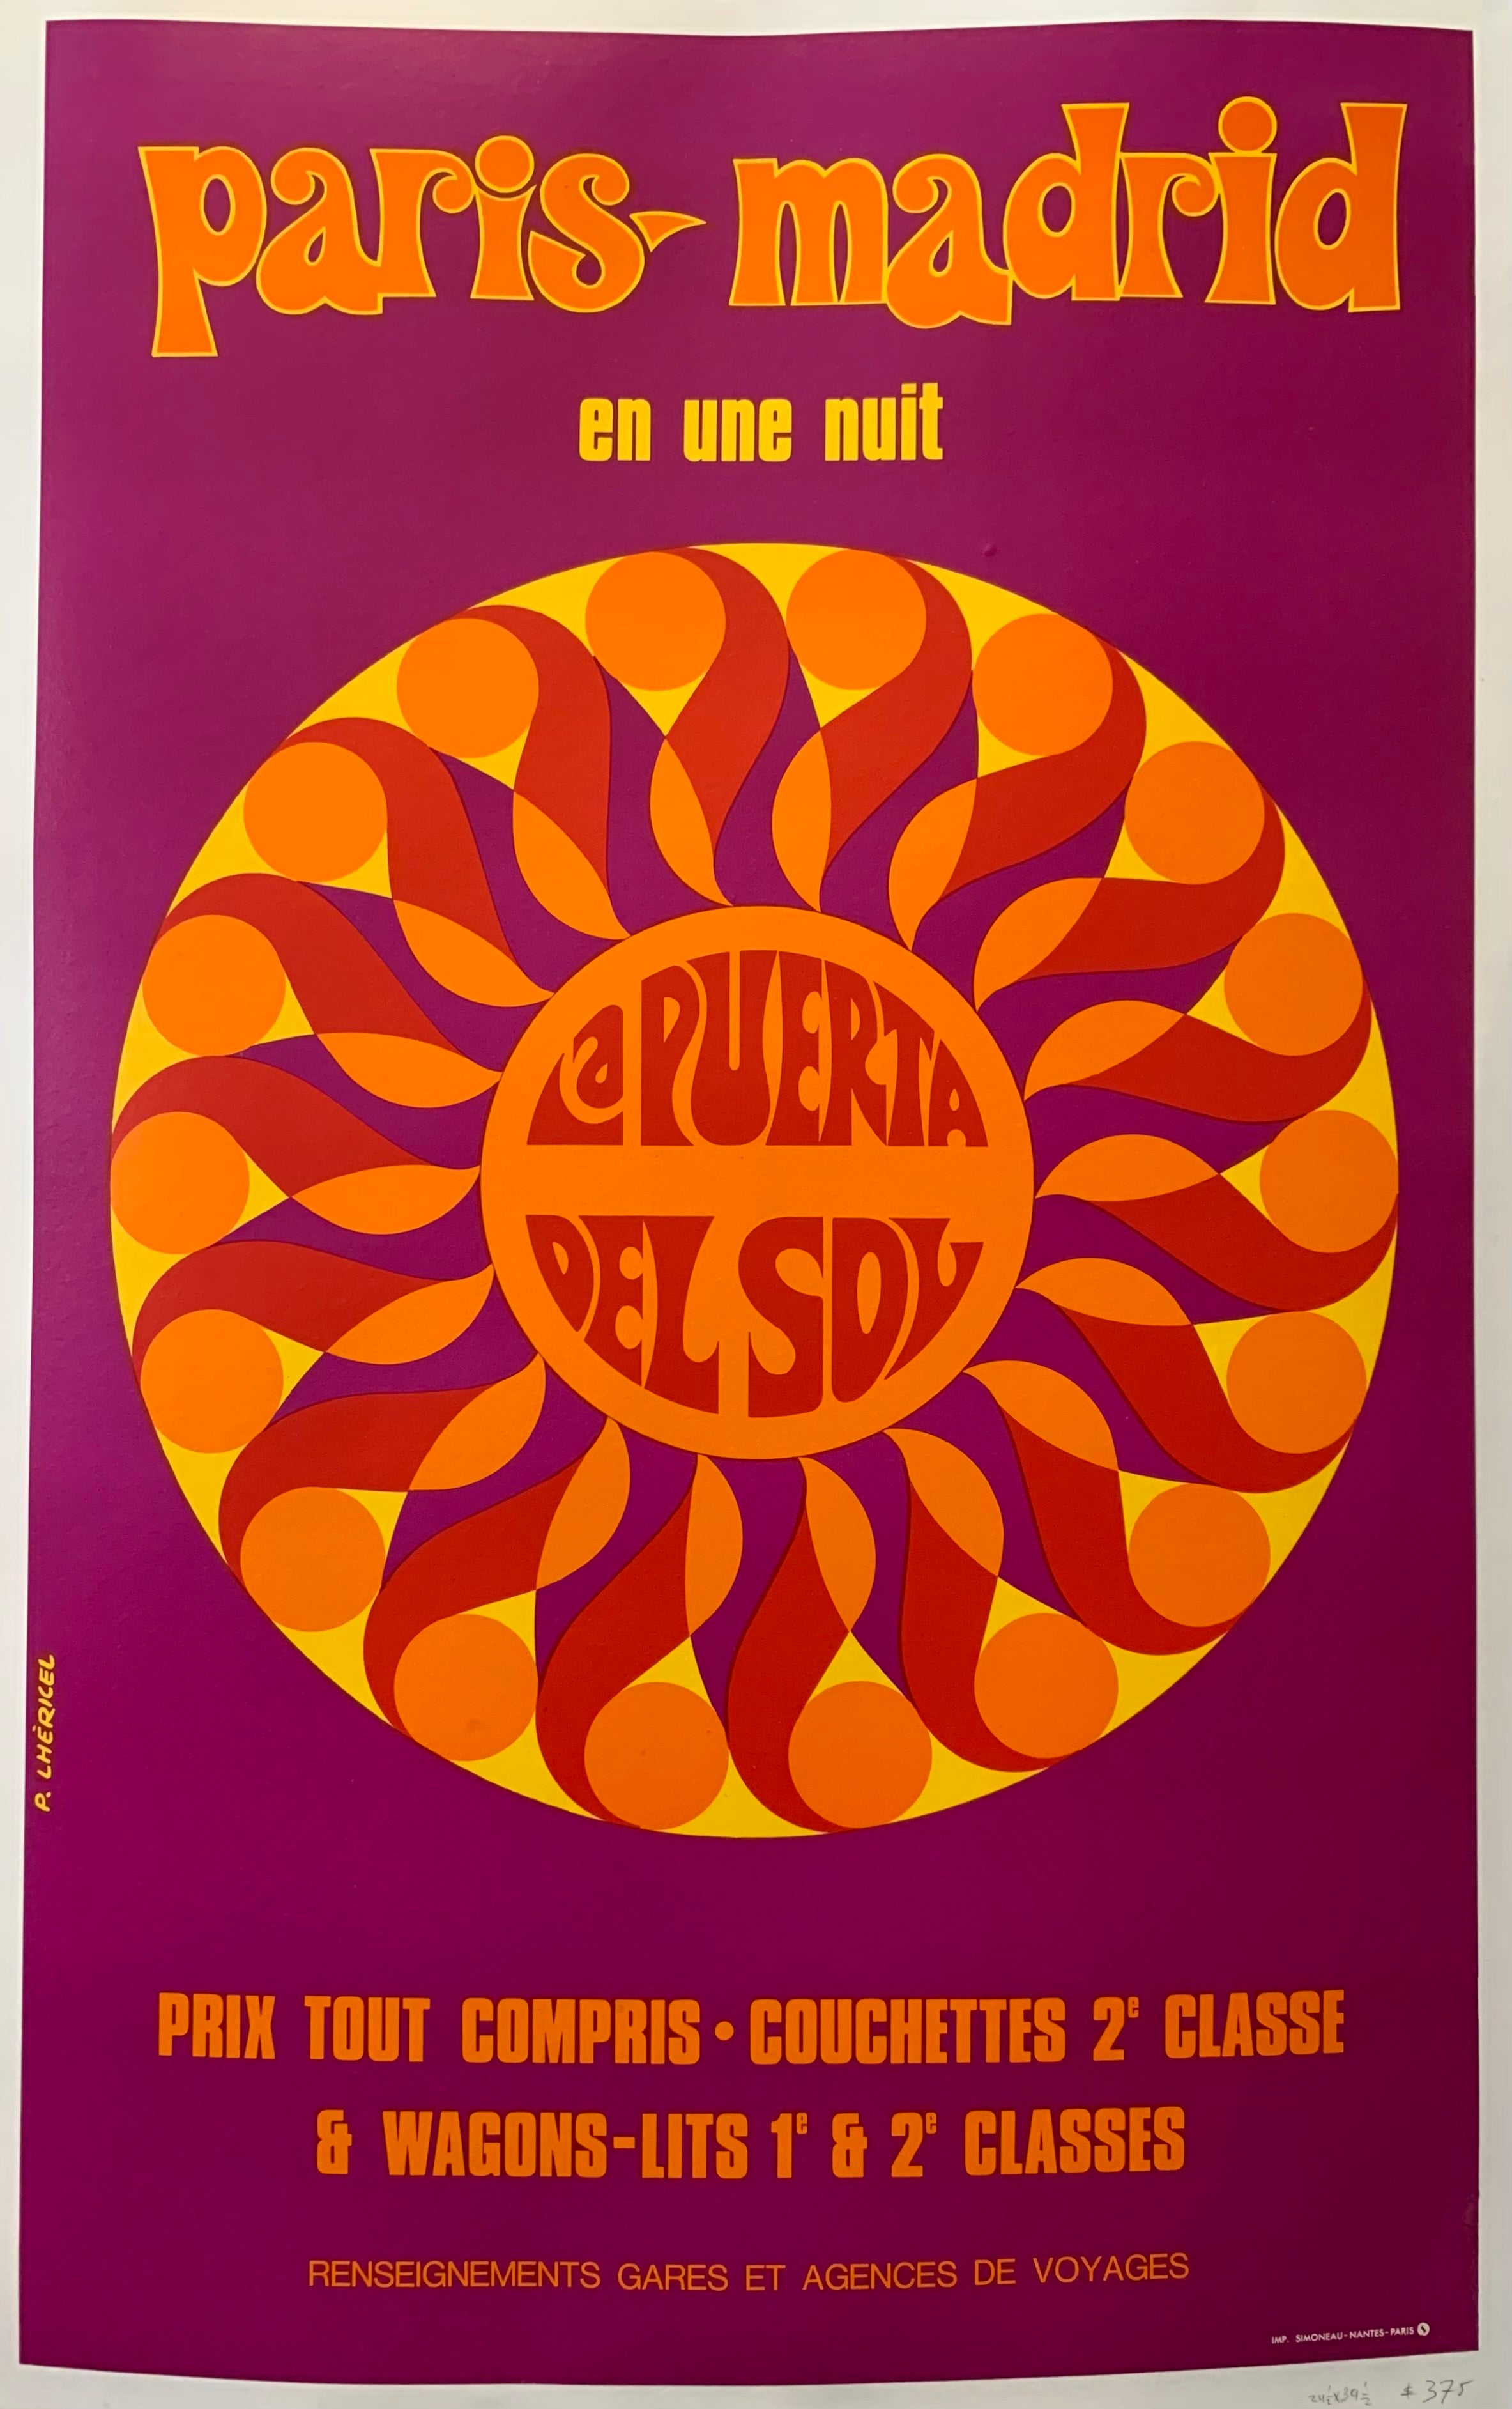 Purple background, with a geometric sun in the center. The text is in orange and yellow. 